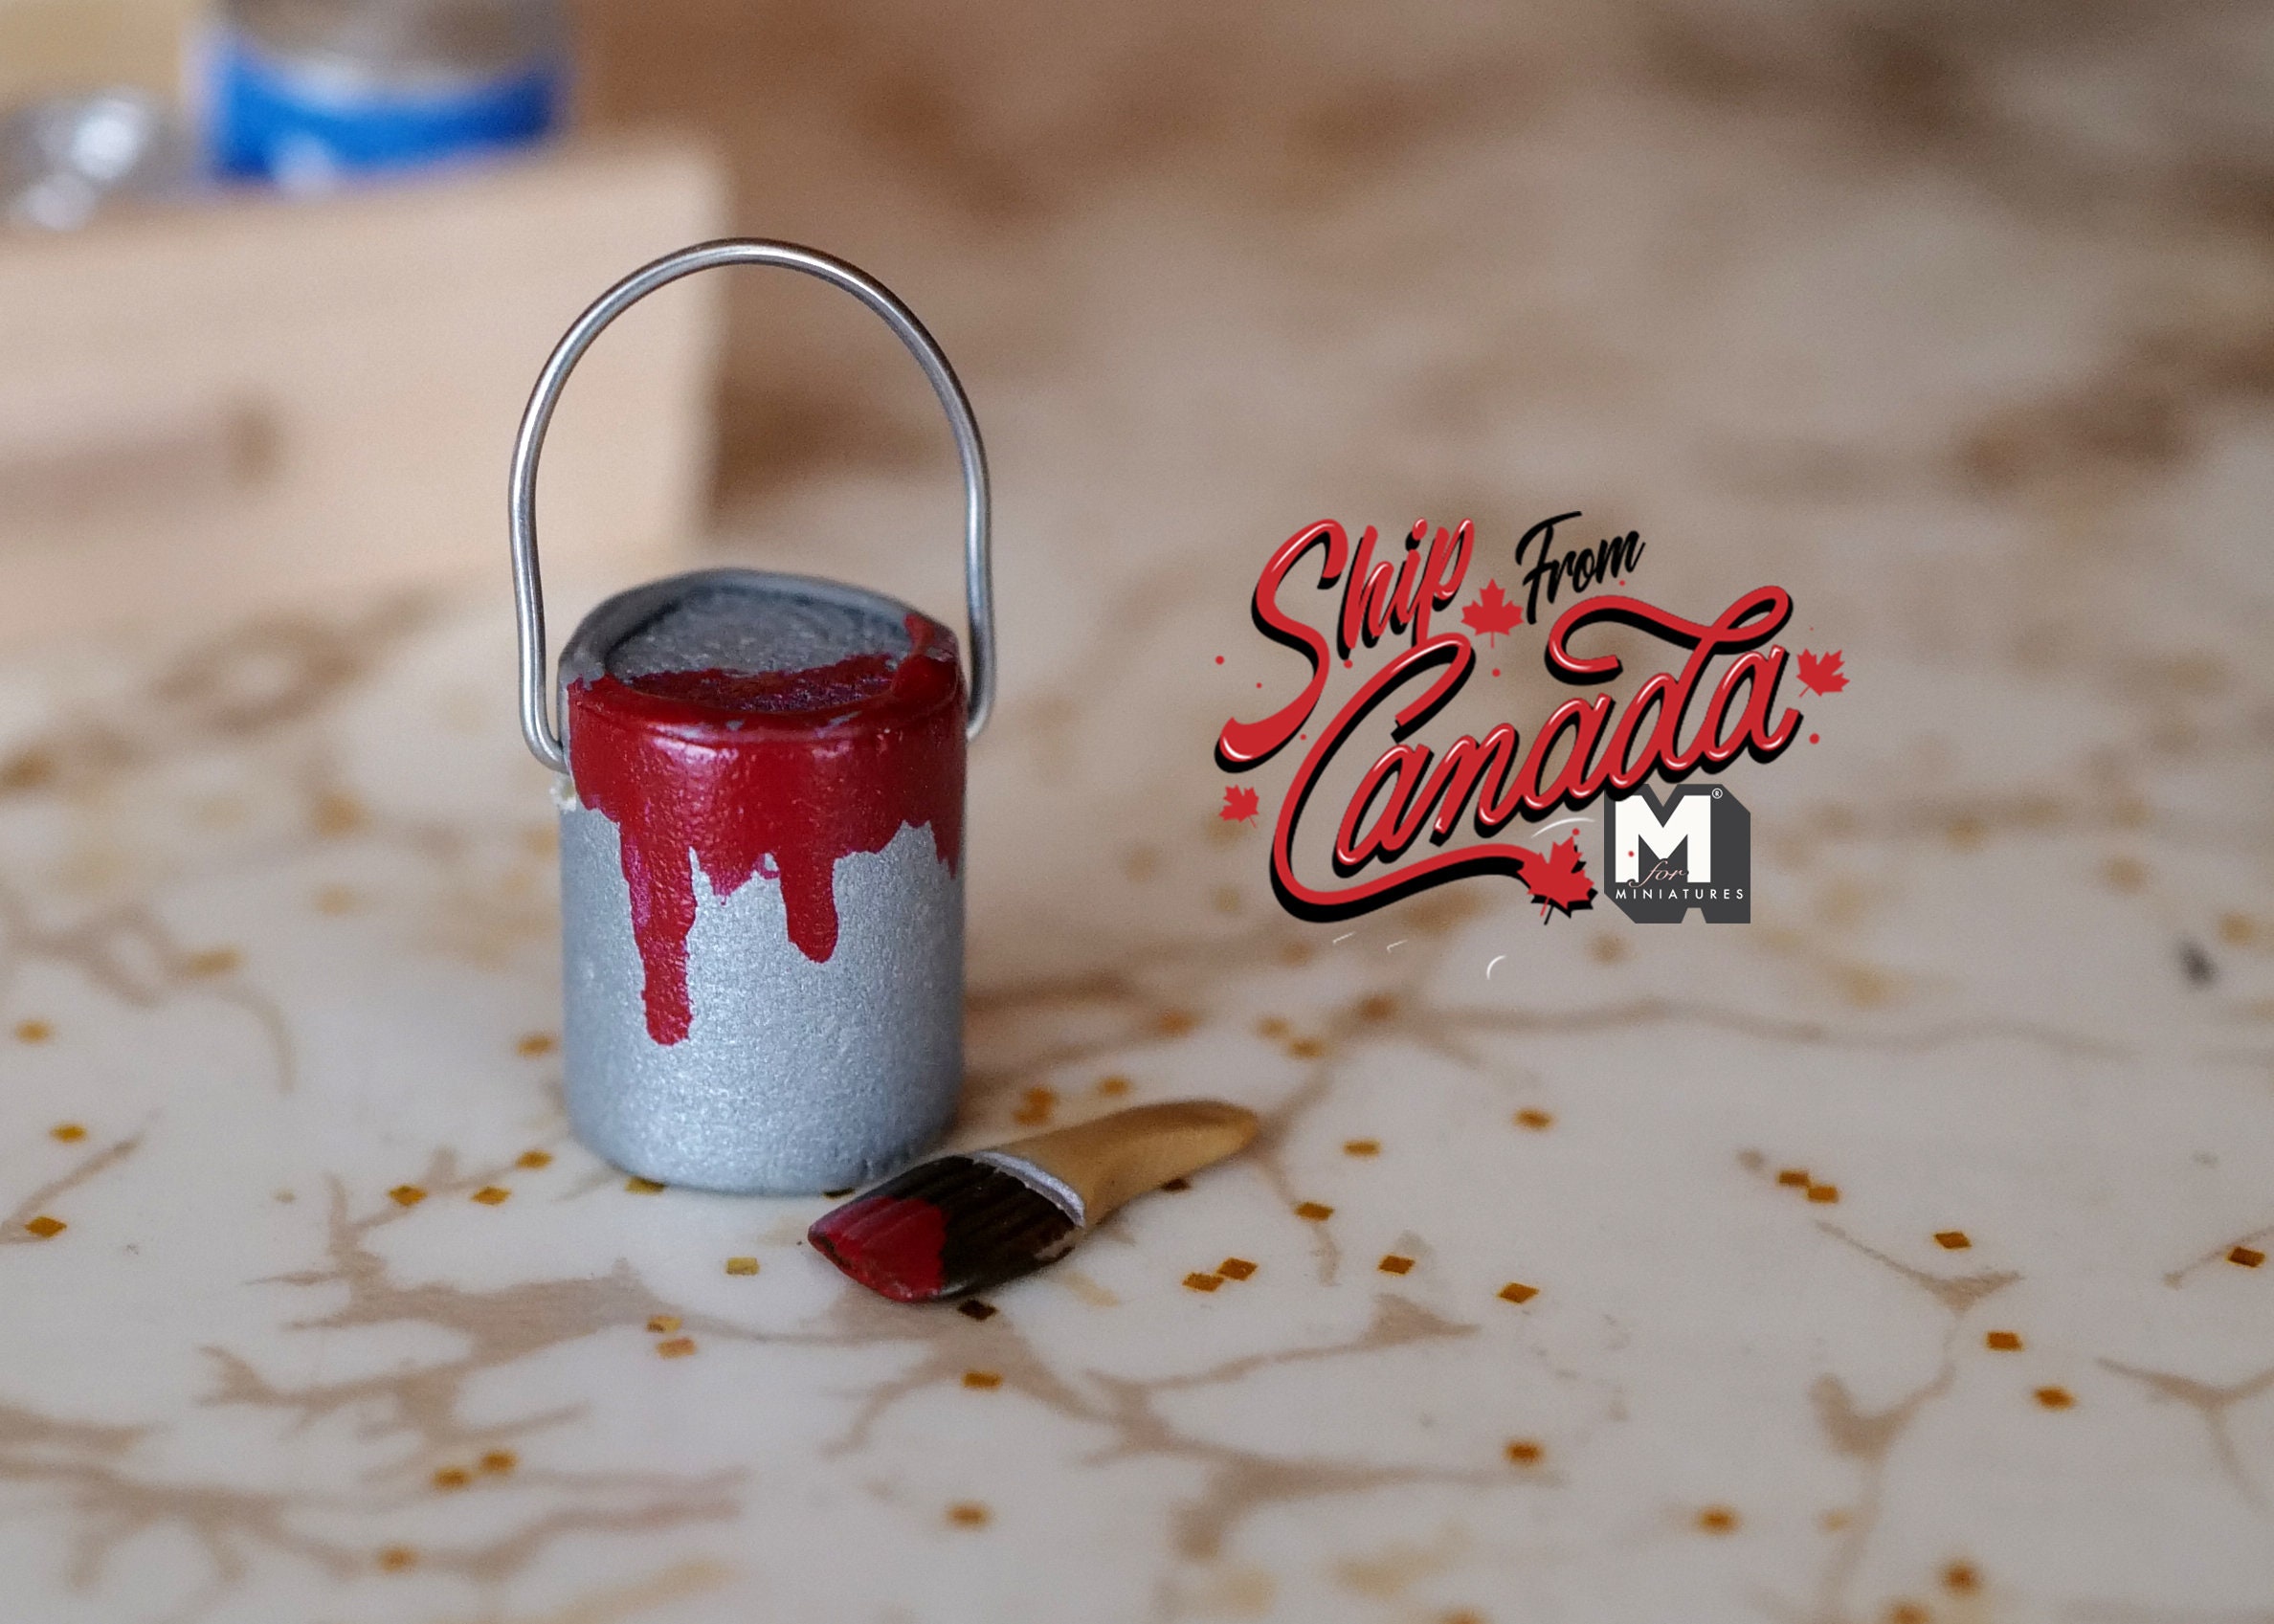 Mini Spray Paint Cans 1:6 Scale -  Sweden